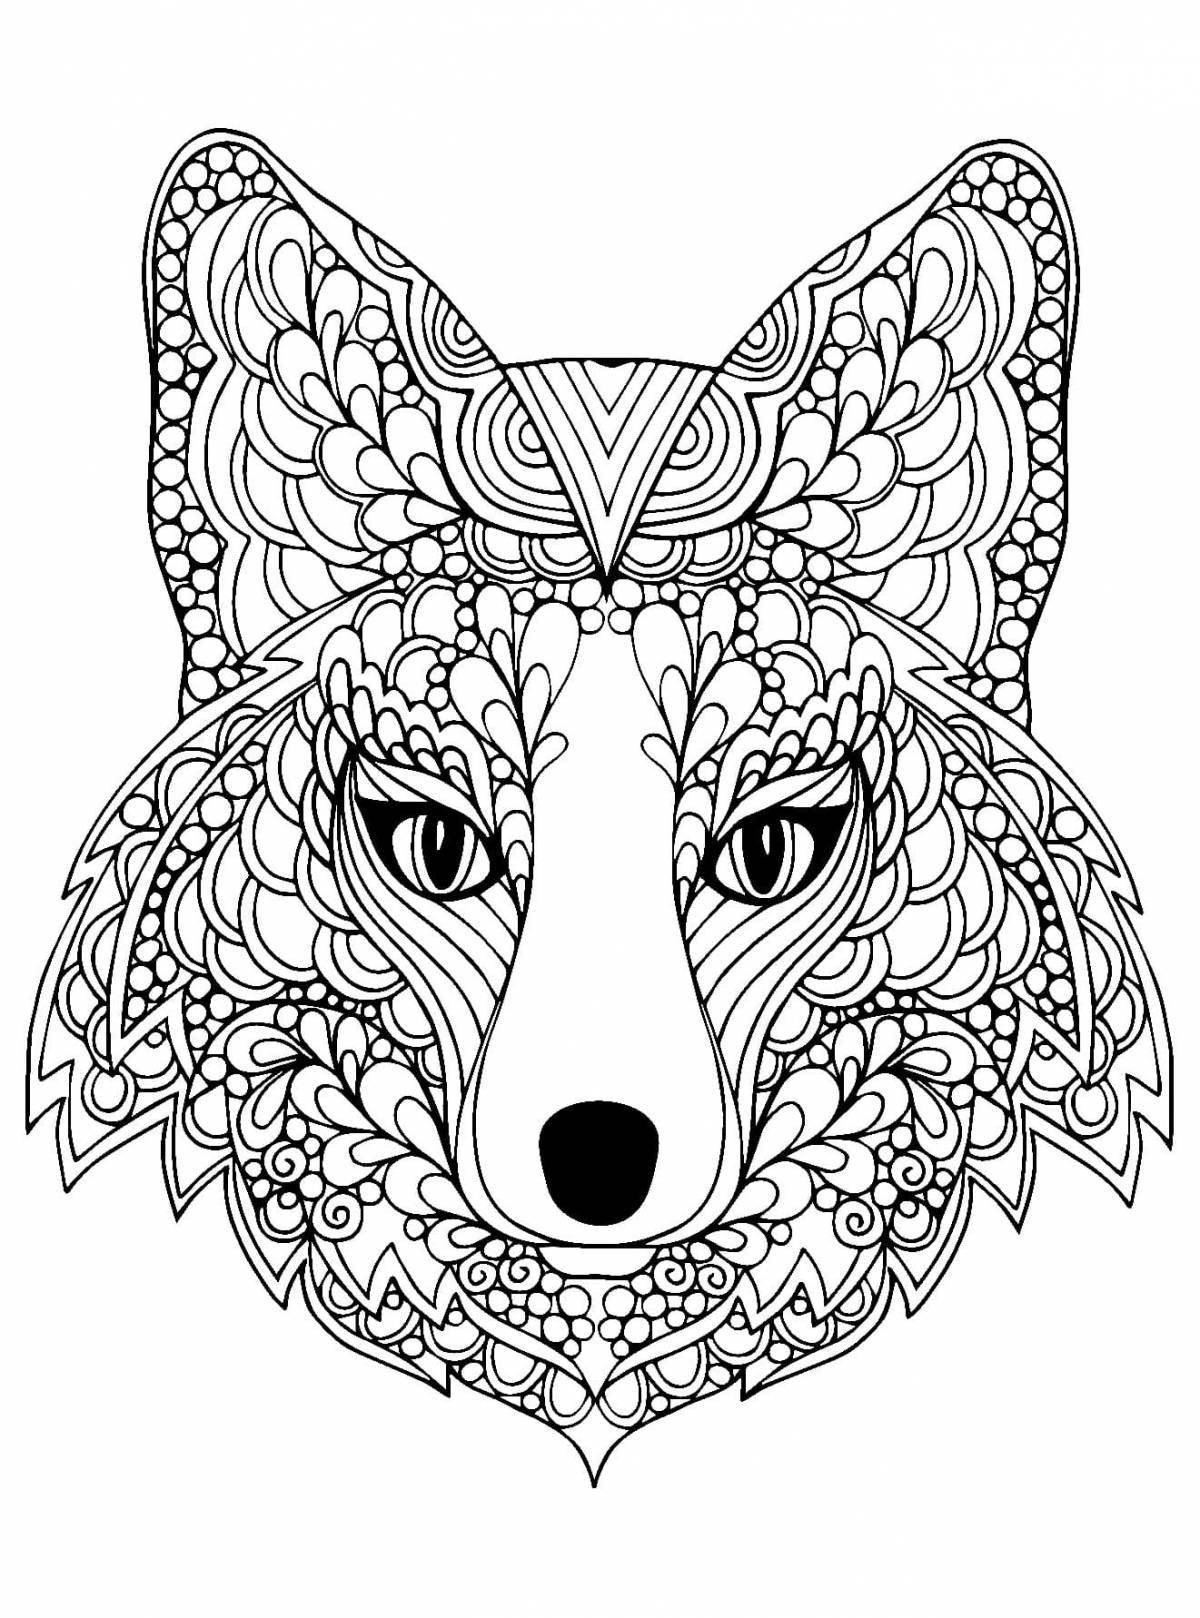 Fox live coloring for adults